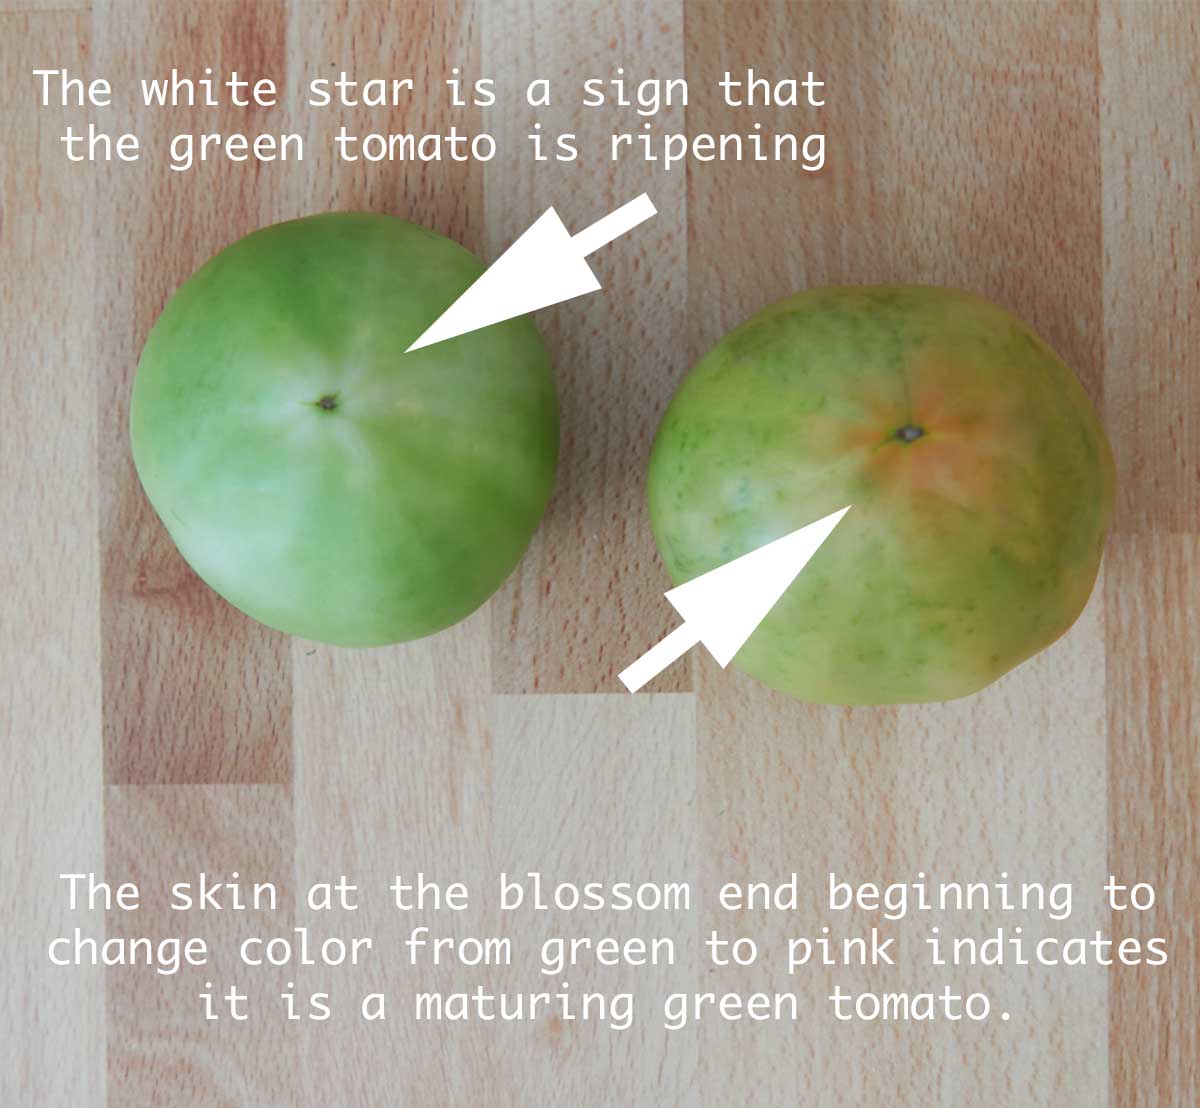 The green tomato matures with a white star sign, or pink skin on bottom.